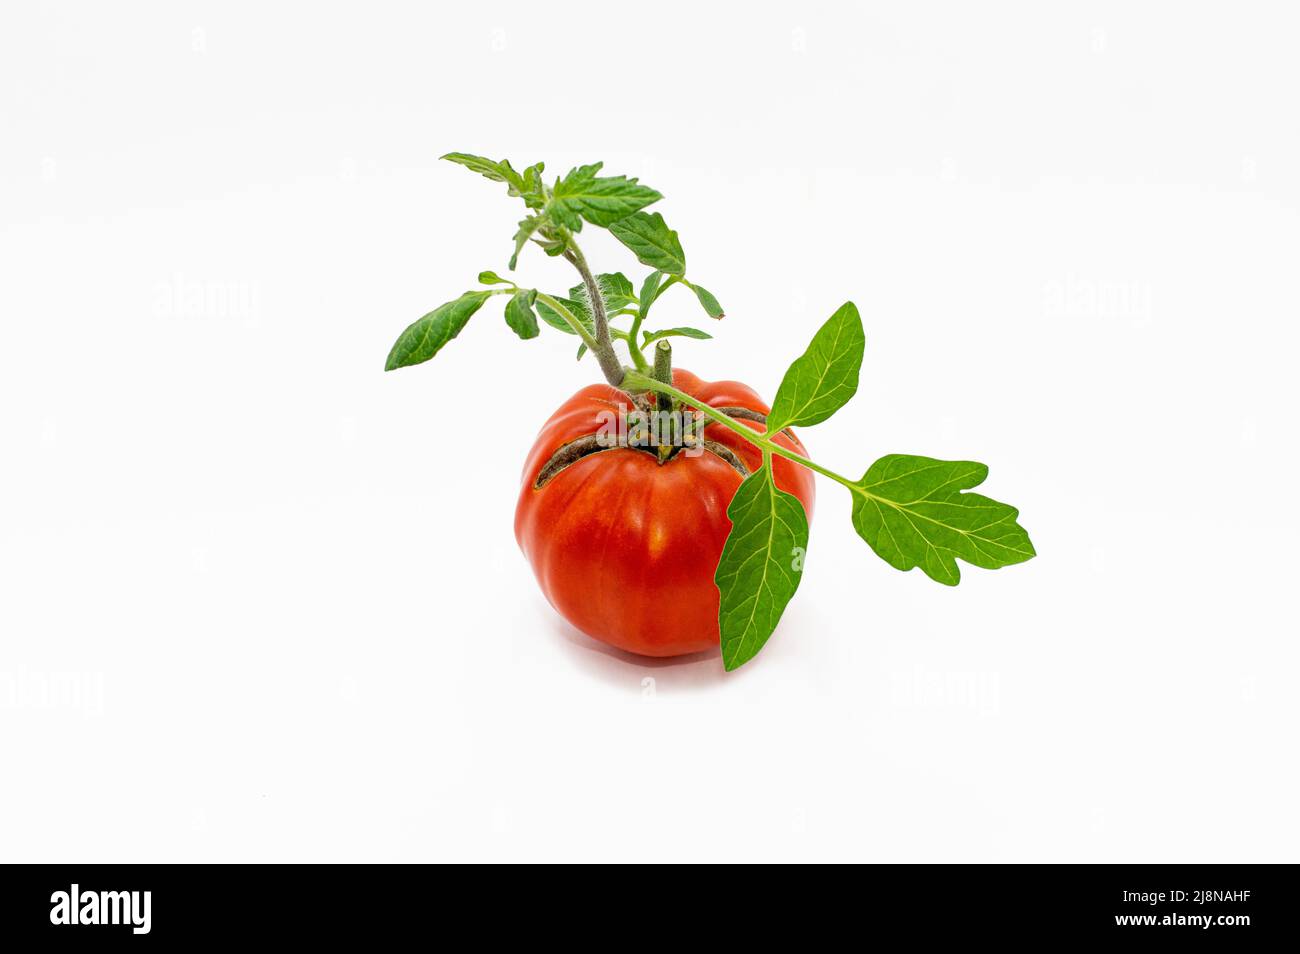 Tomato fruits damaged by bacterial disease. Cracking of a tomato as a result of excess moisture. Crop loss. Close-up Stock Photo